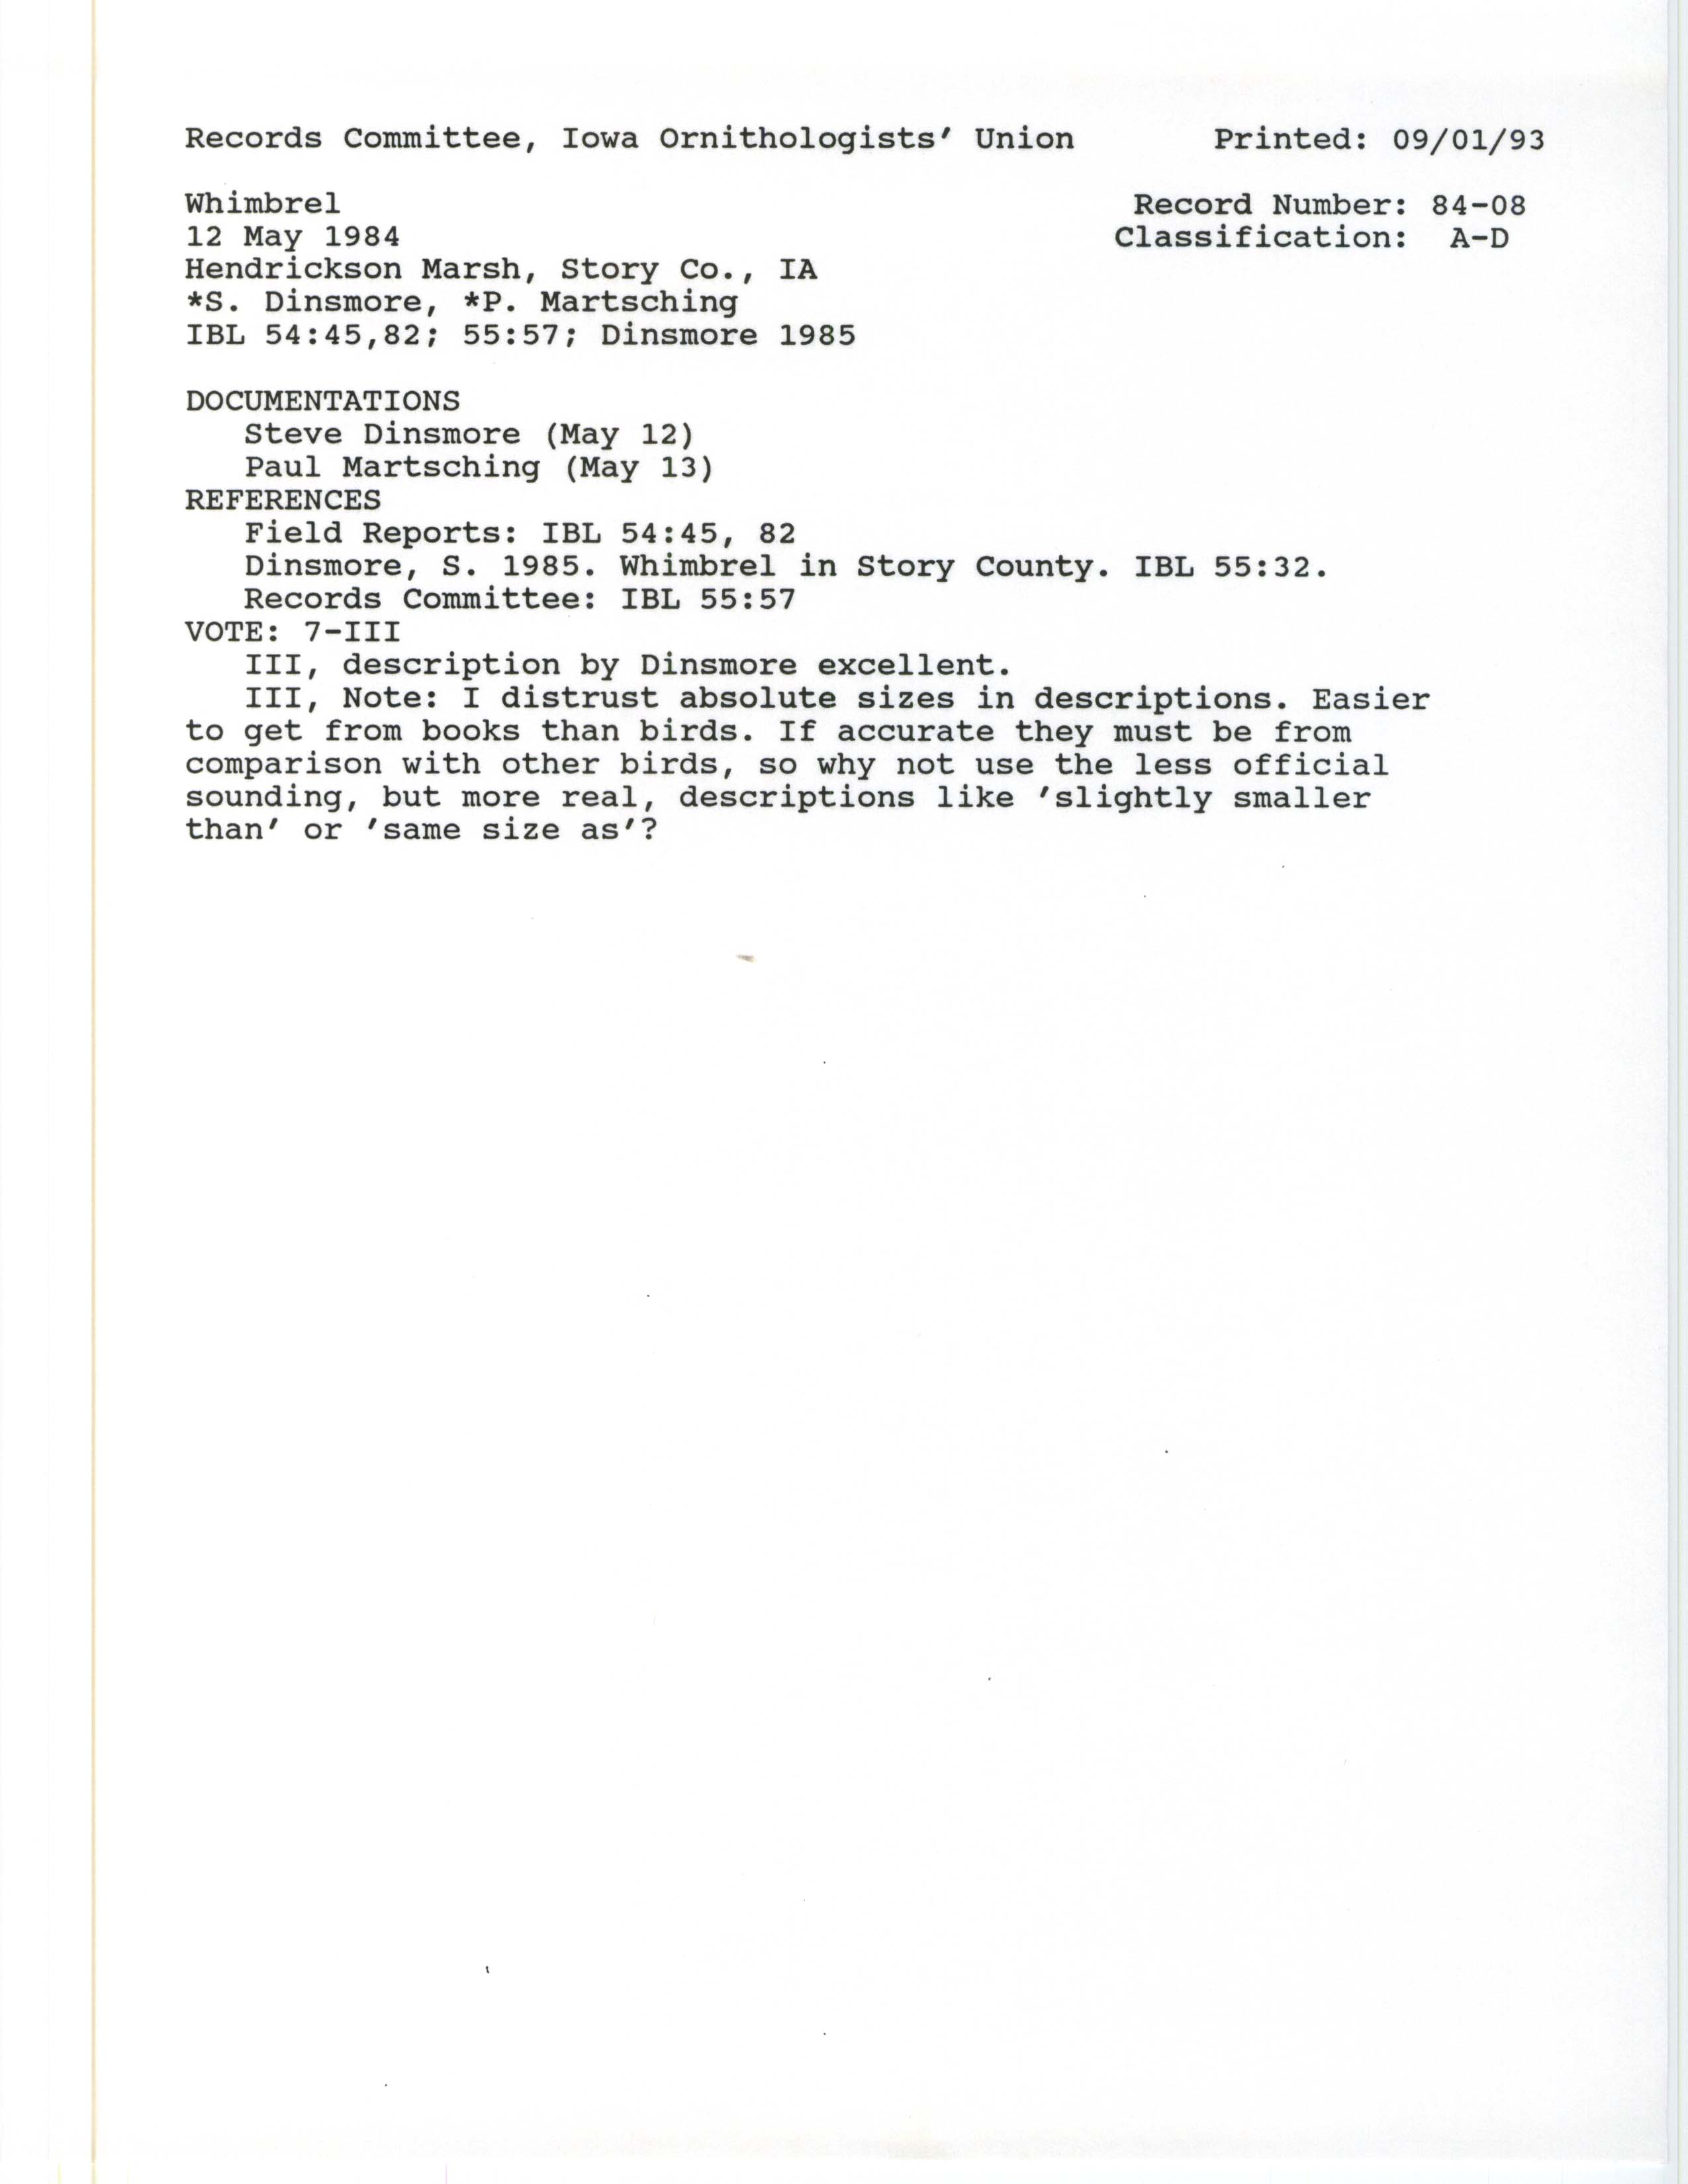 Records Committee review for rare bird sighting of Whimbrel at Hendrickson Marsh, 1984